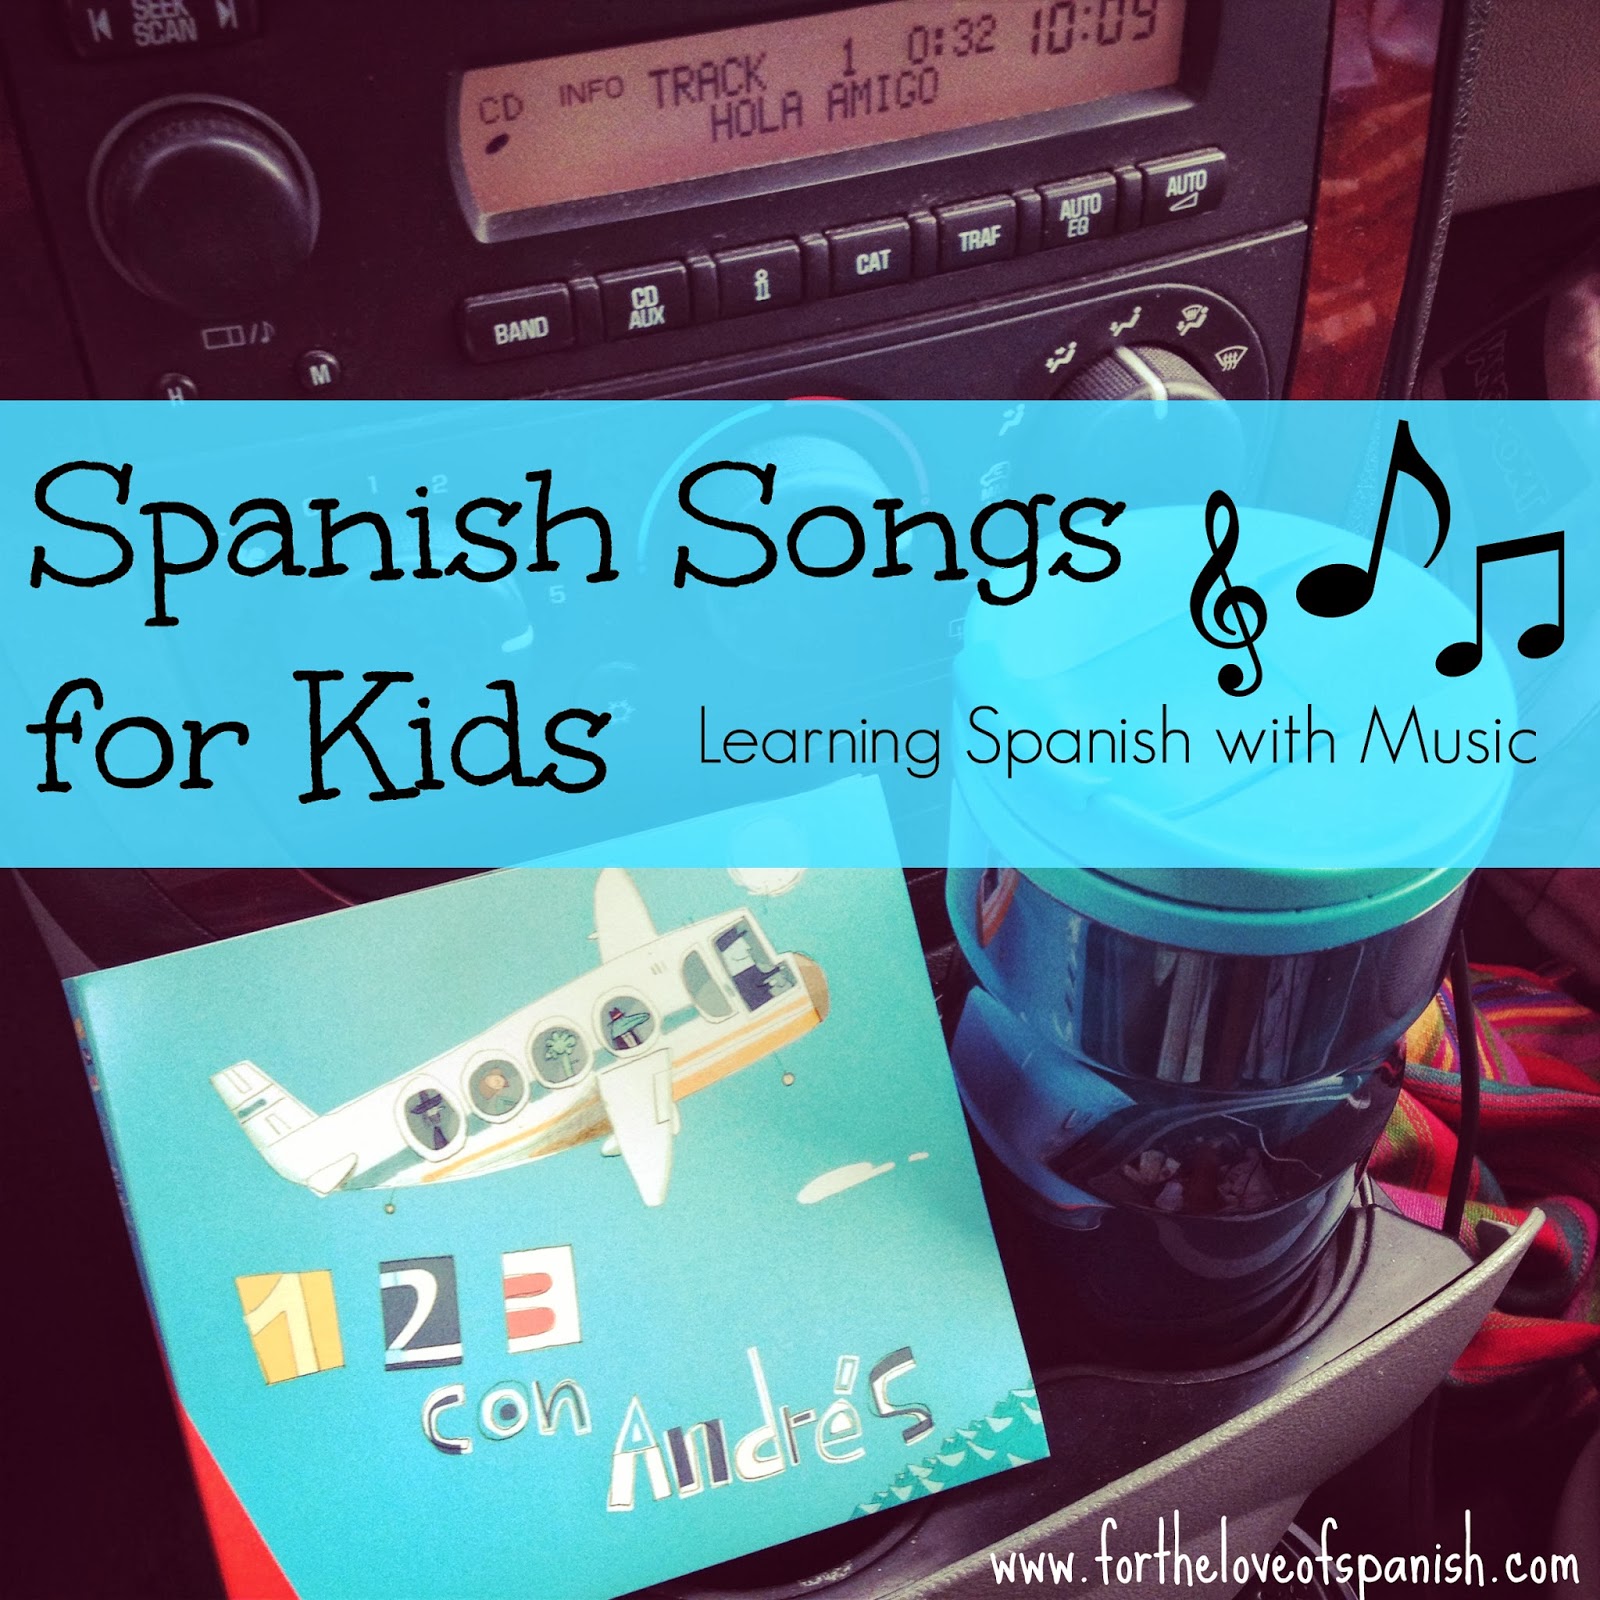 ¡1, 2, 3 con Andrés! a Review //  Kids Songs for Learning Spanish